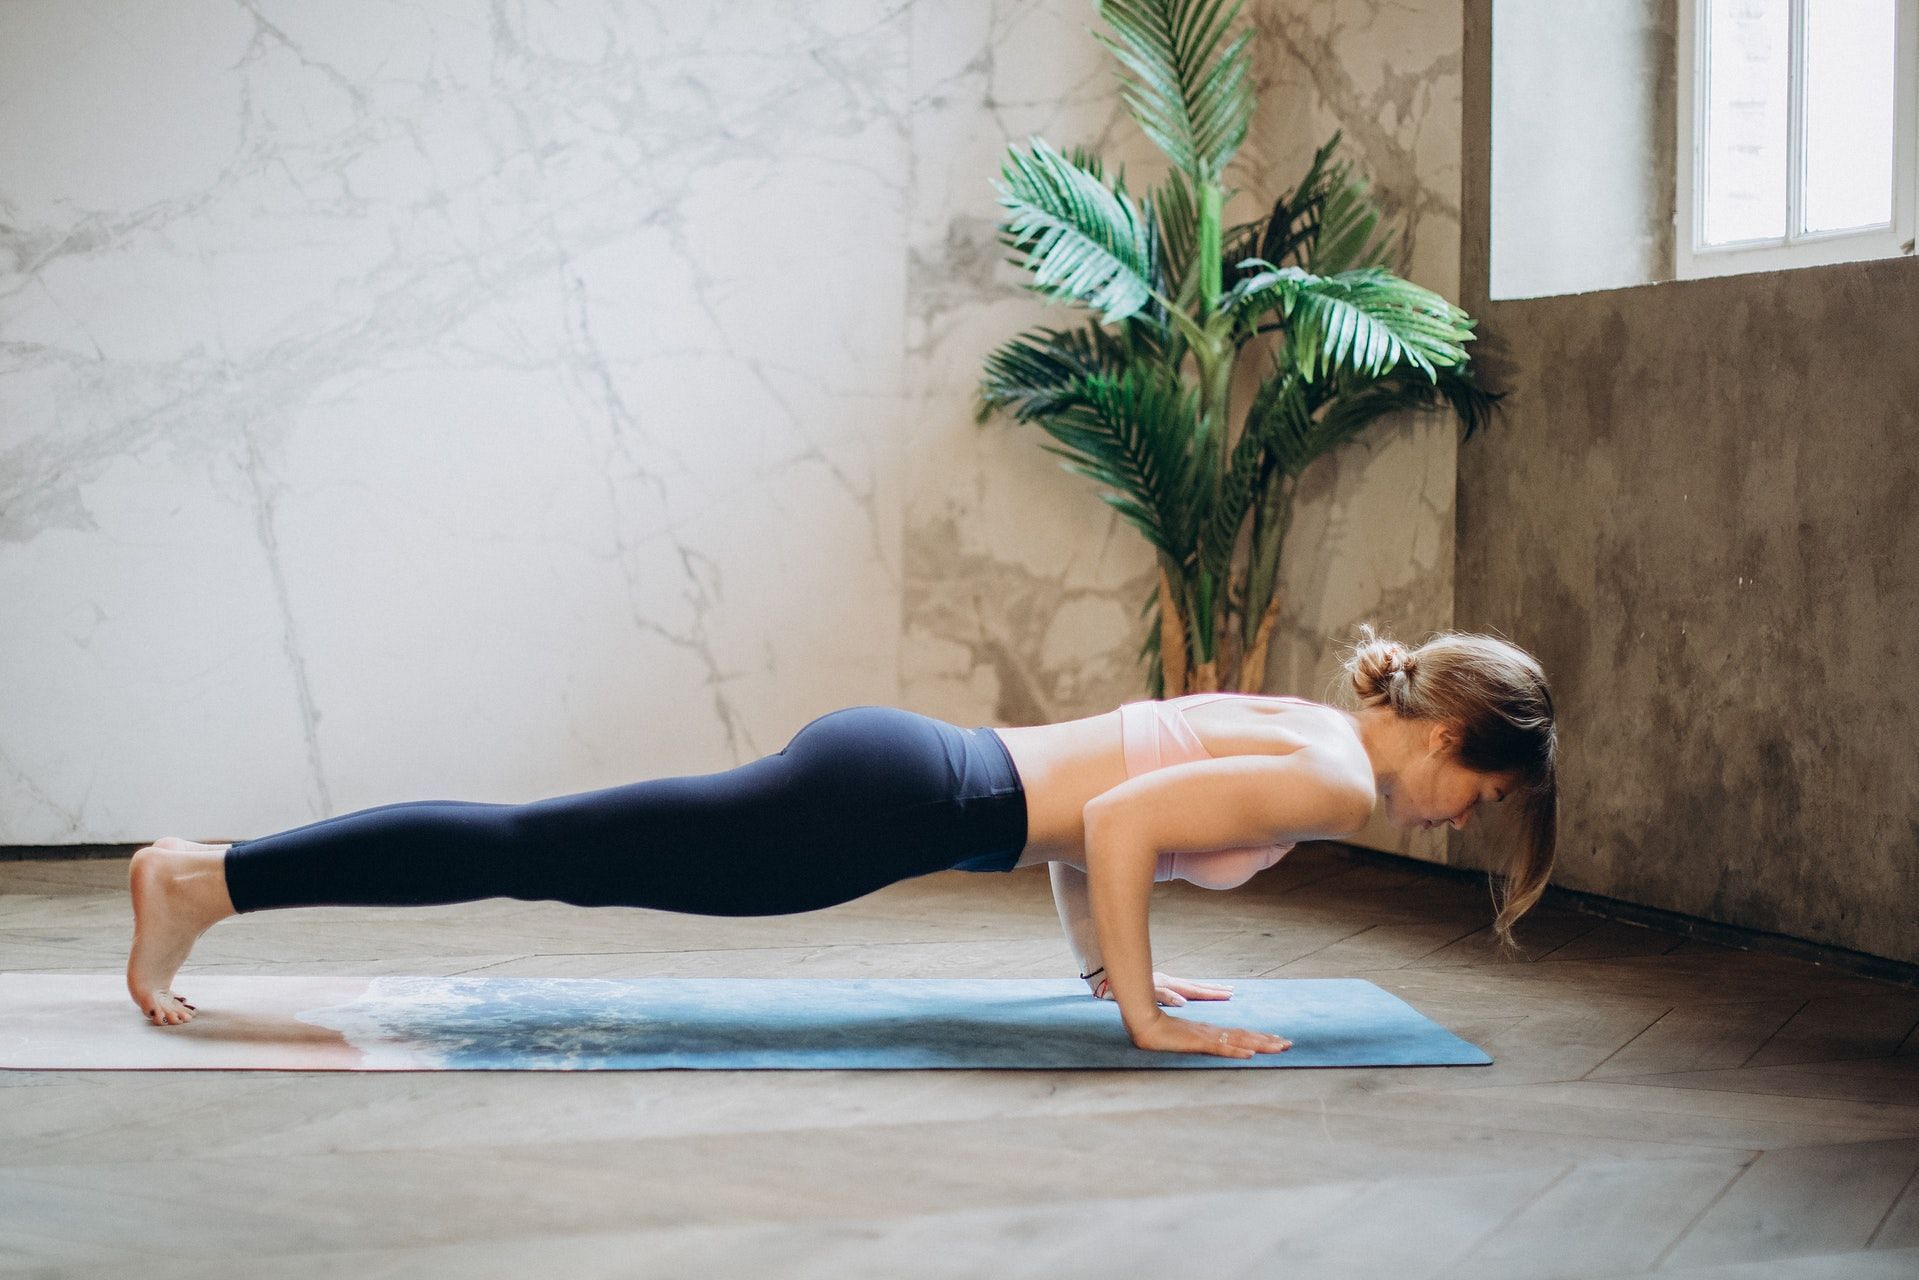 Push-ups are an effective upper-body exercise. (Photo by Elina Fairytale via pexels)